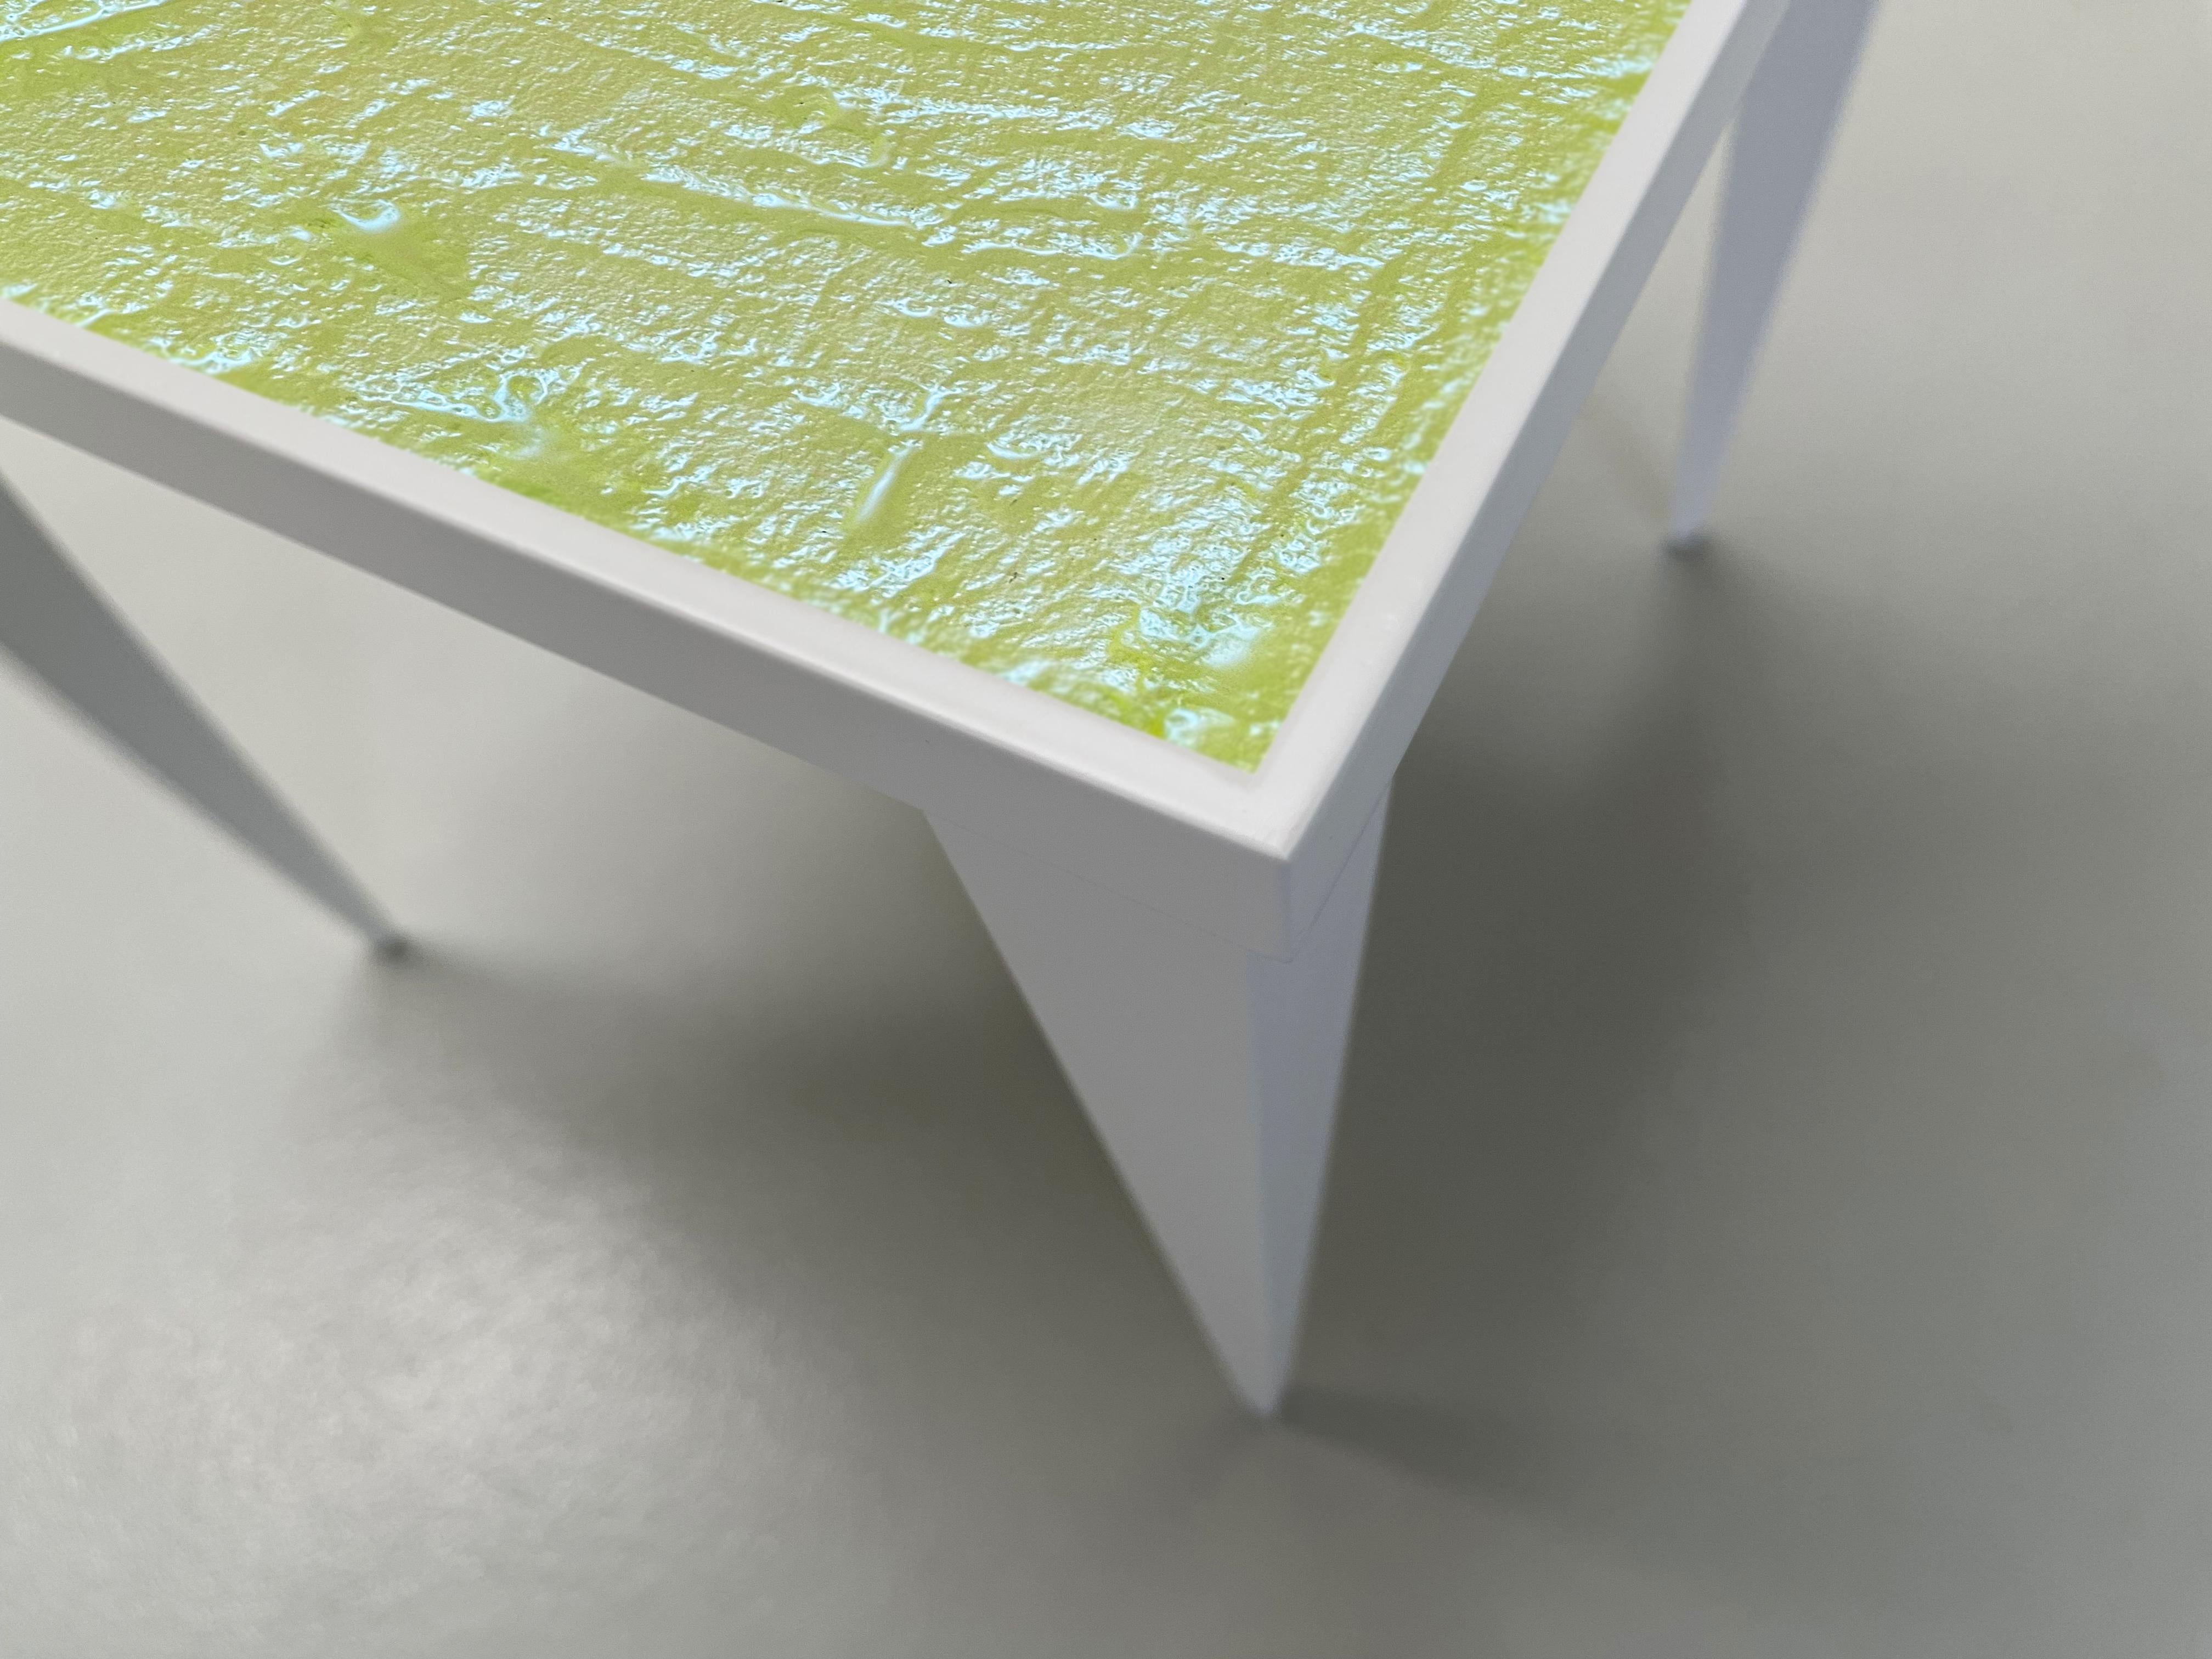 Italian Contemporary ‘Square’ Table Yellow Crystal and Oak Wood Handmade by Ghirò Studio For Sale